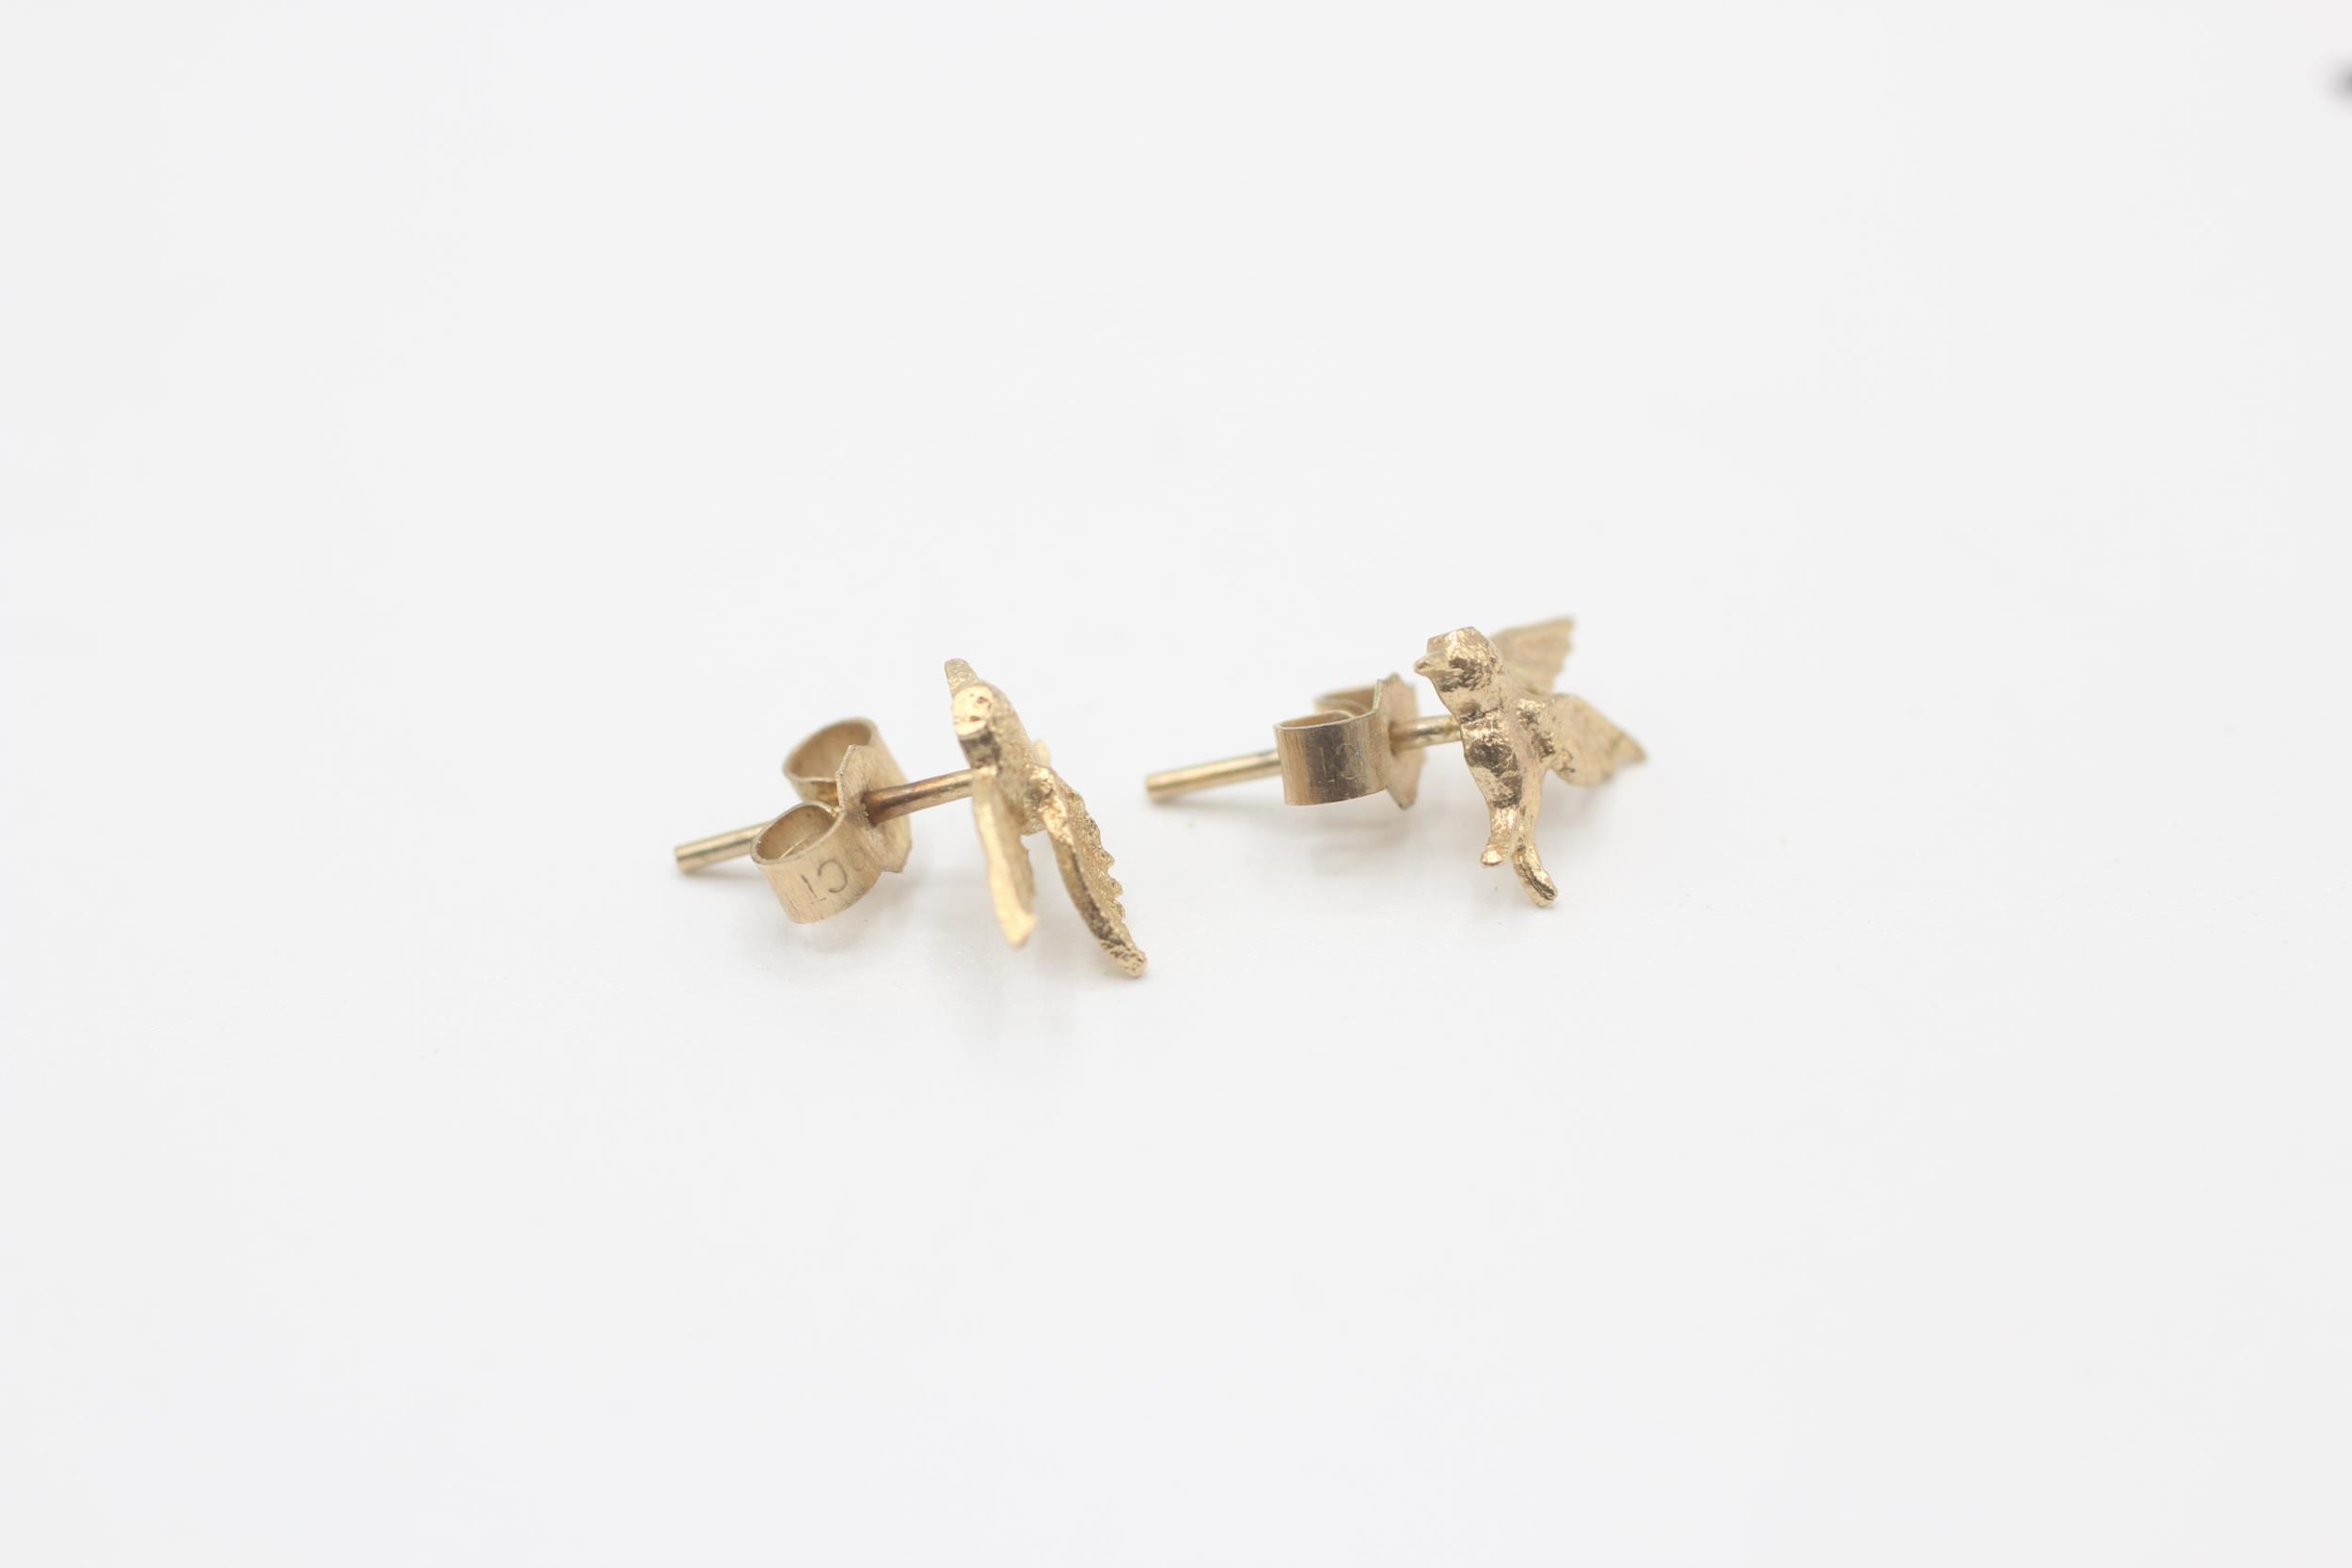 9ct gold bird stud earring with scroll backs - 0.5 g - Image 2 of 4